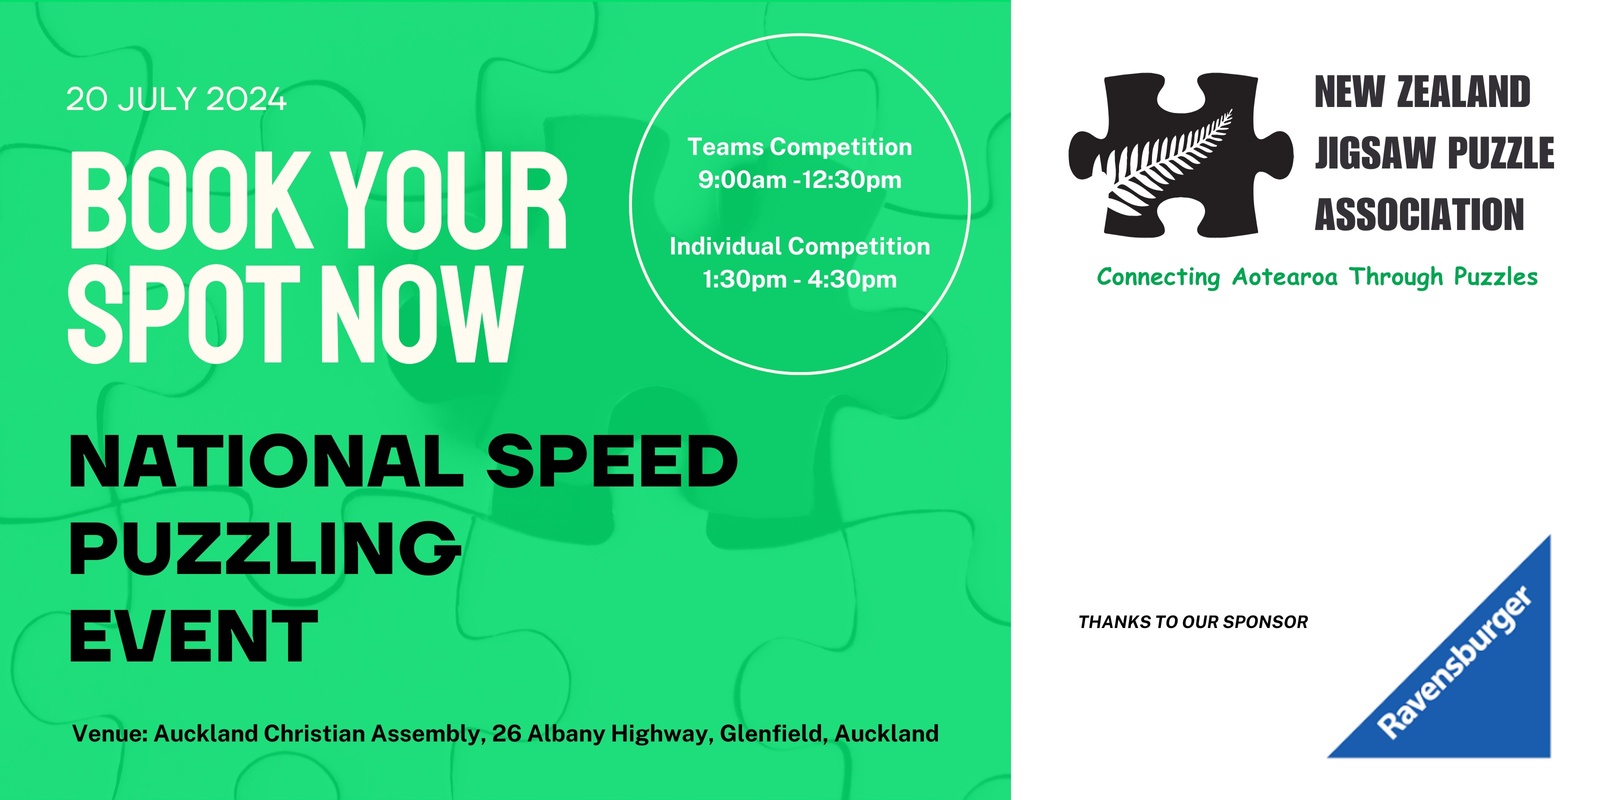 Banner image for NZJPA National Speed Puzzling Event